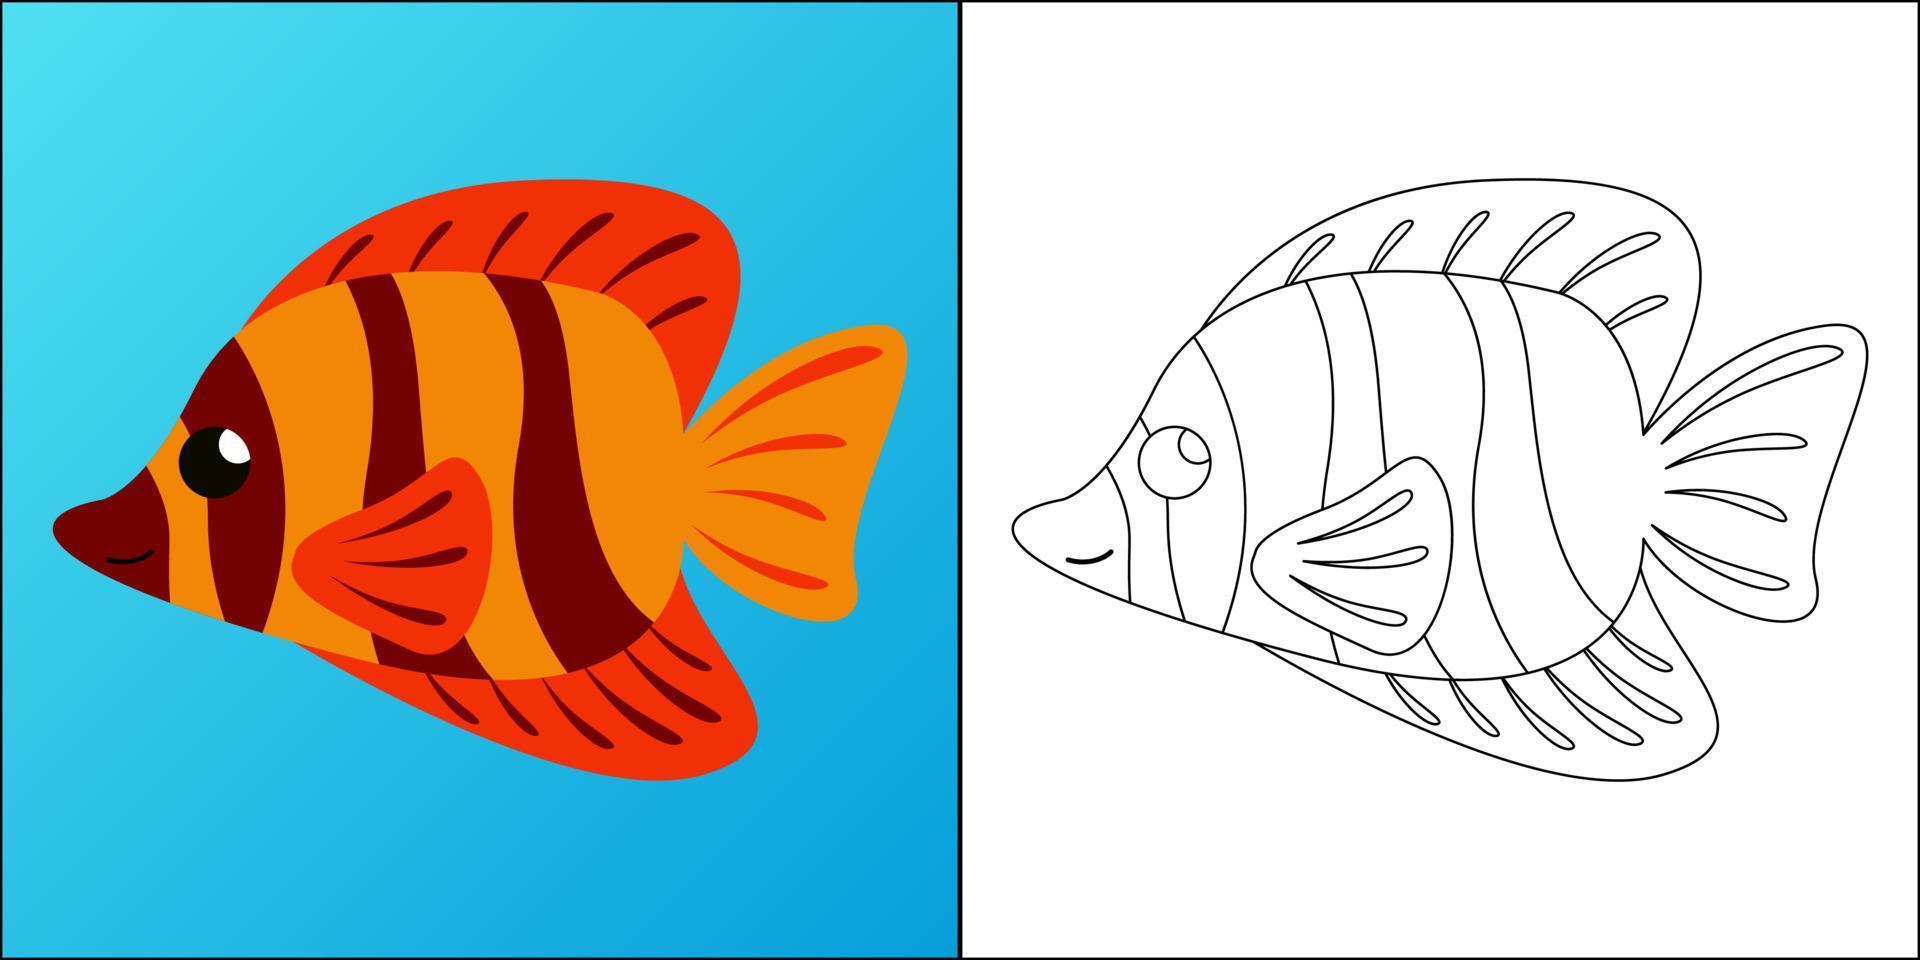 Saltwater fish suitable for children's coloring page vector illustration